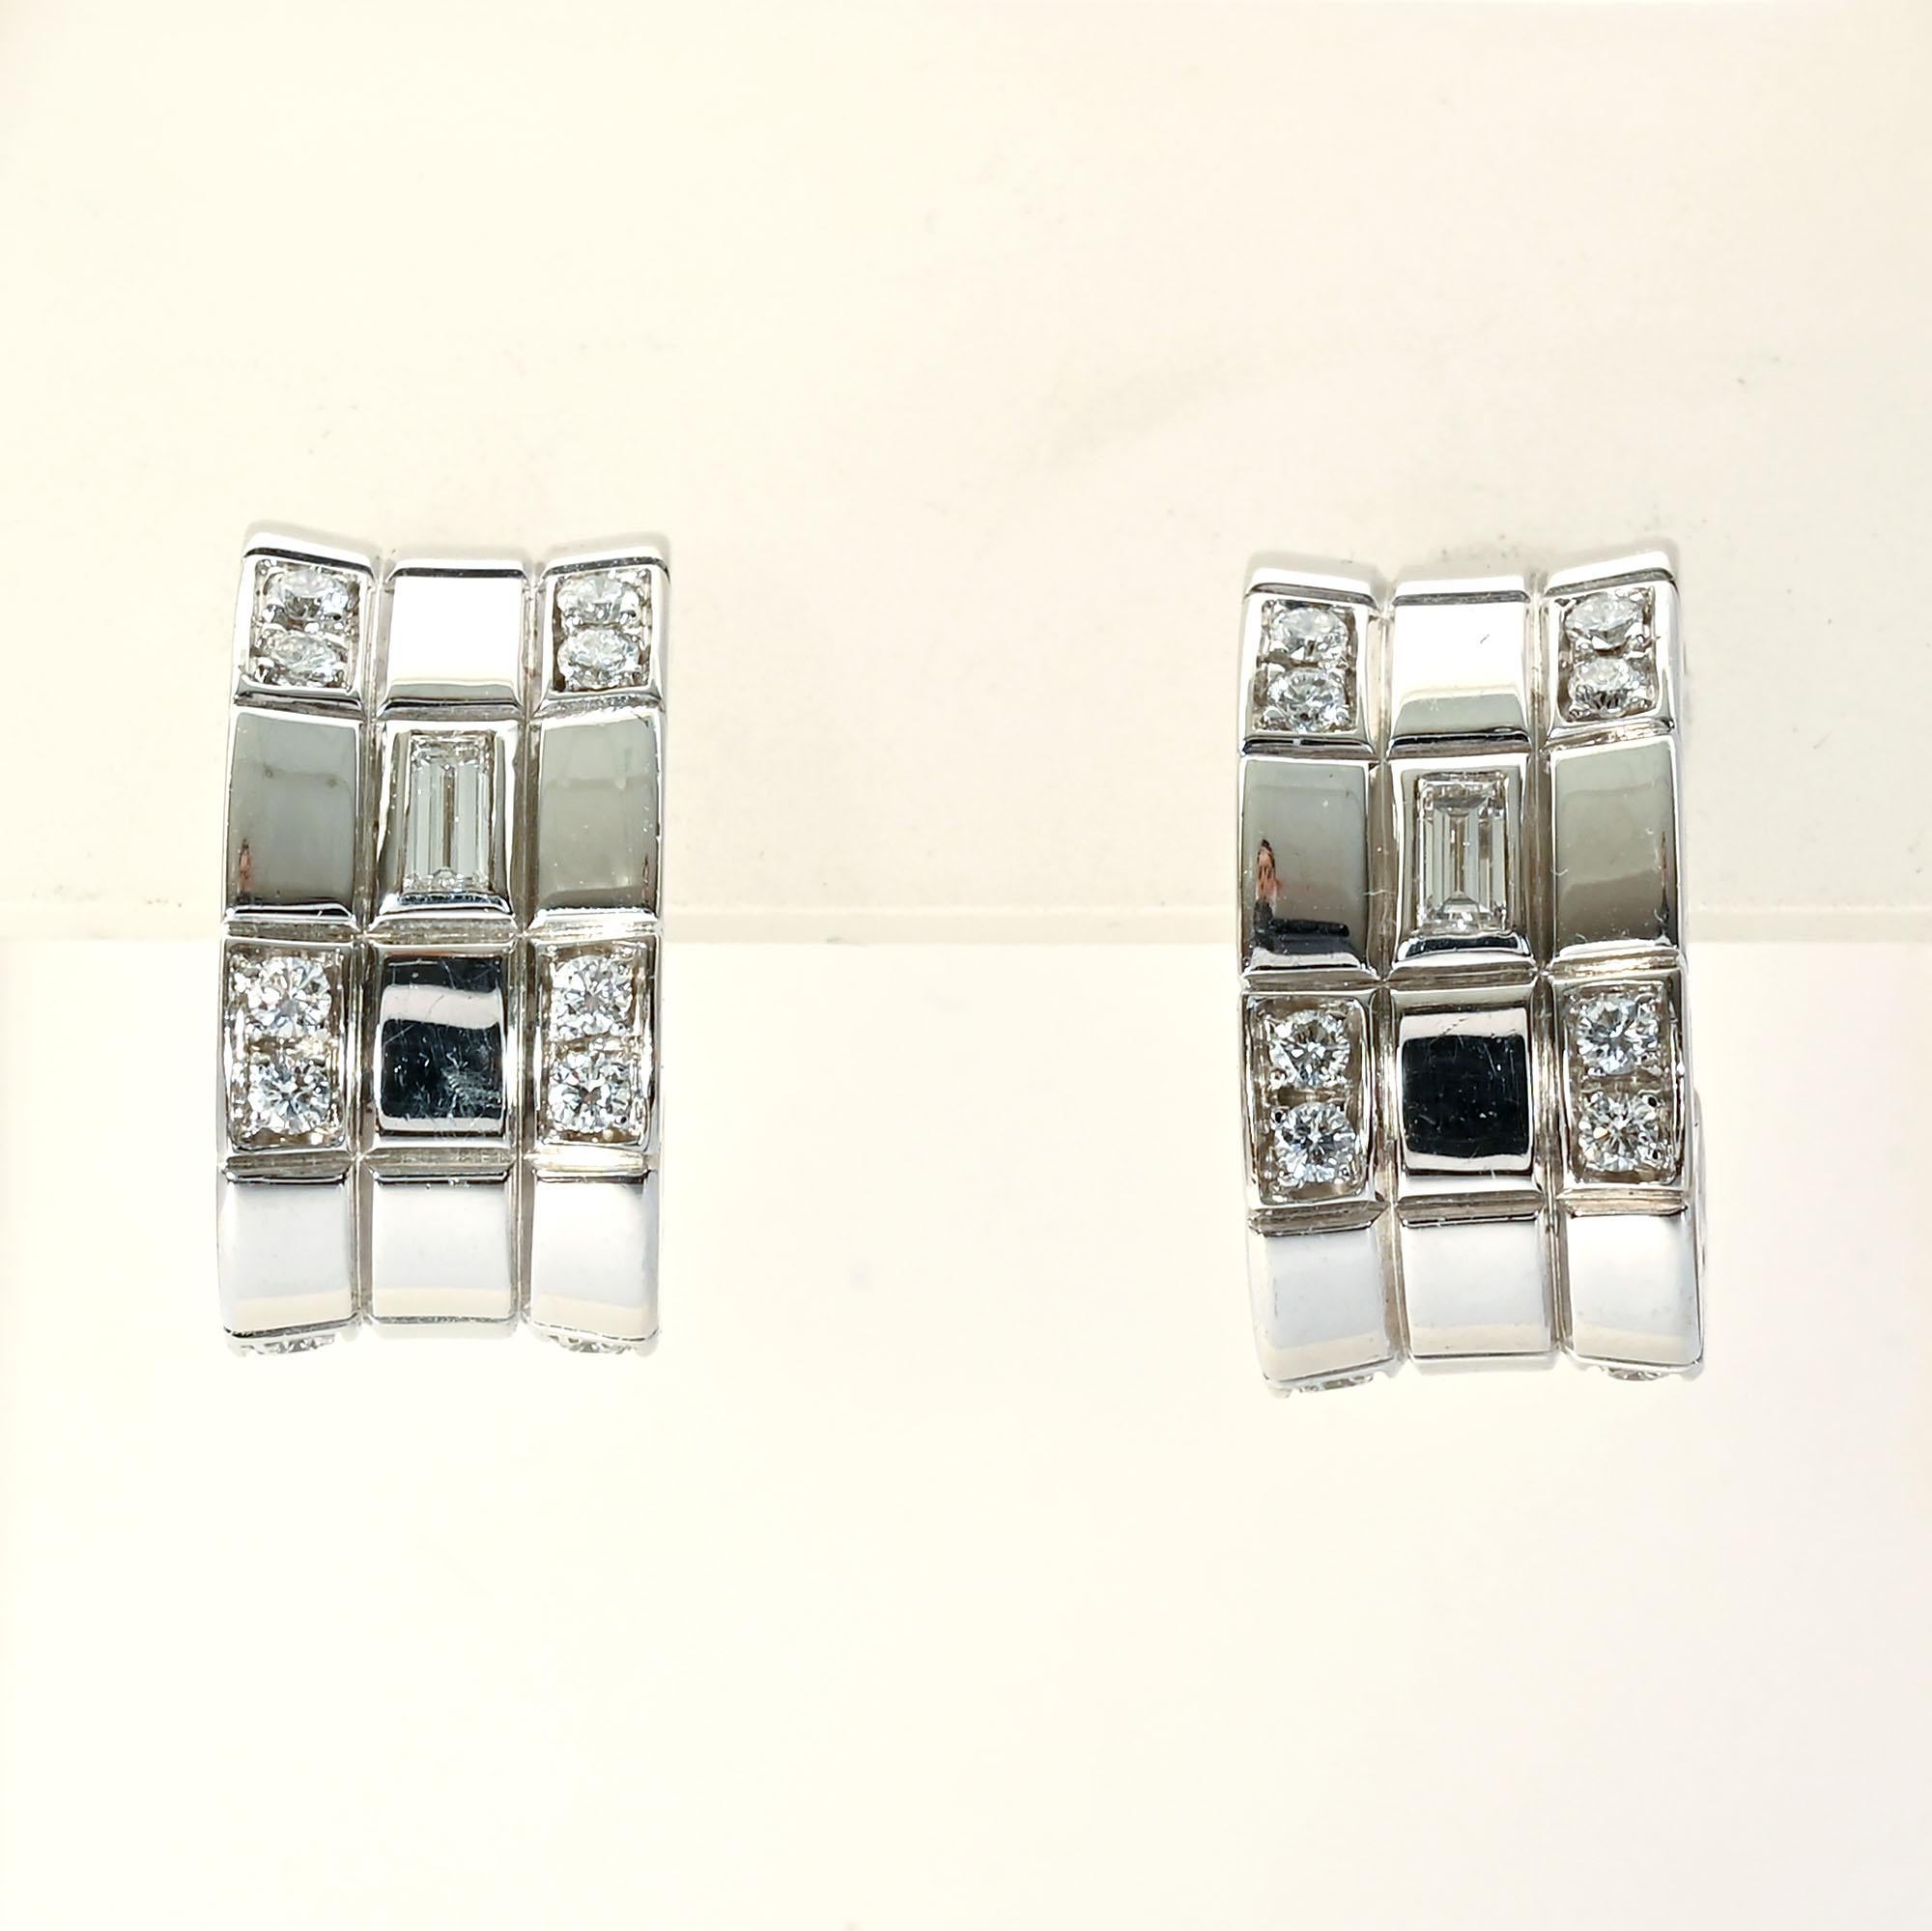 Asprey half hoop earrings done in 18 karat white gold.  They have a total weight  of one carat of diamonds. Rectangles of gold alternate with those of diamonds making for just the right amount of sparkle.  Clip backs can be converted to posts.